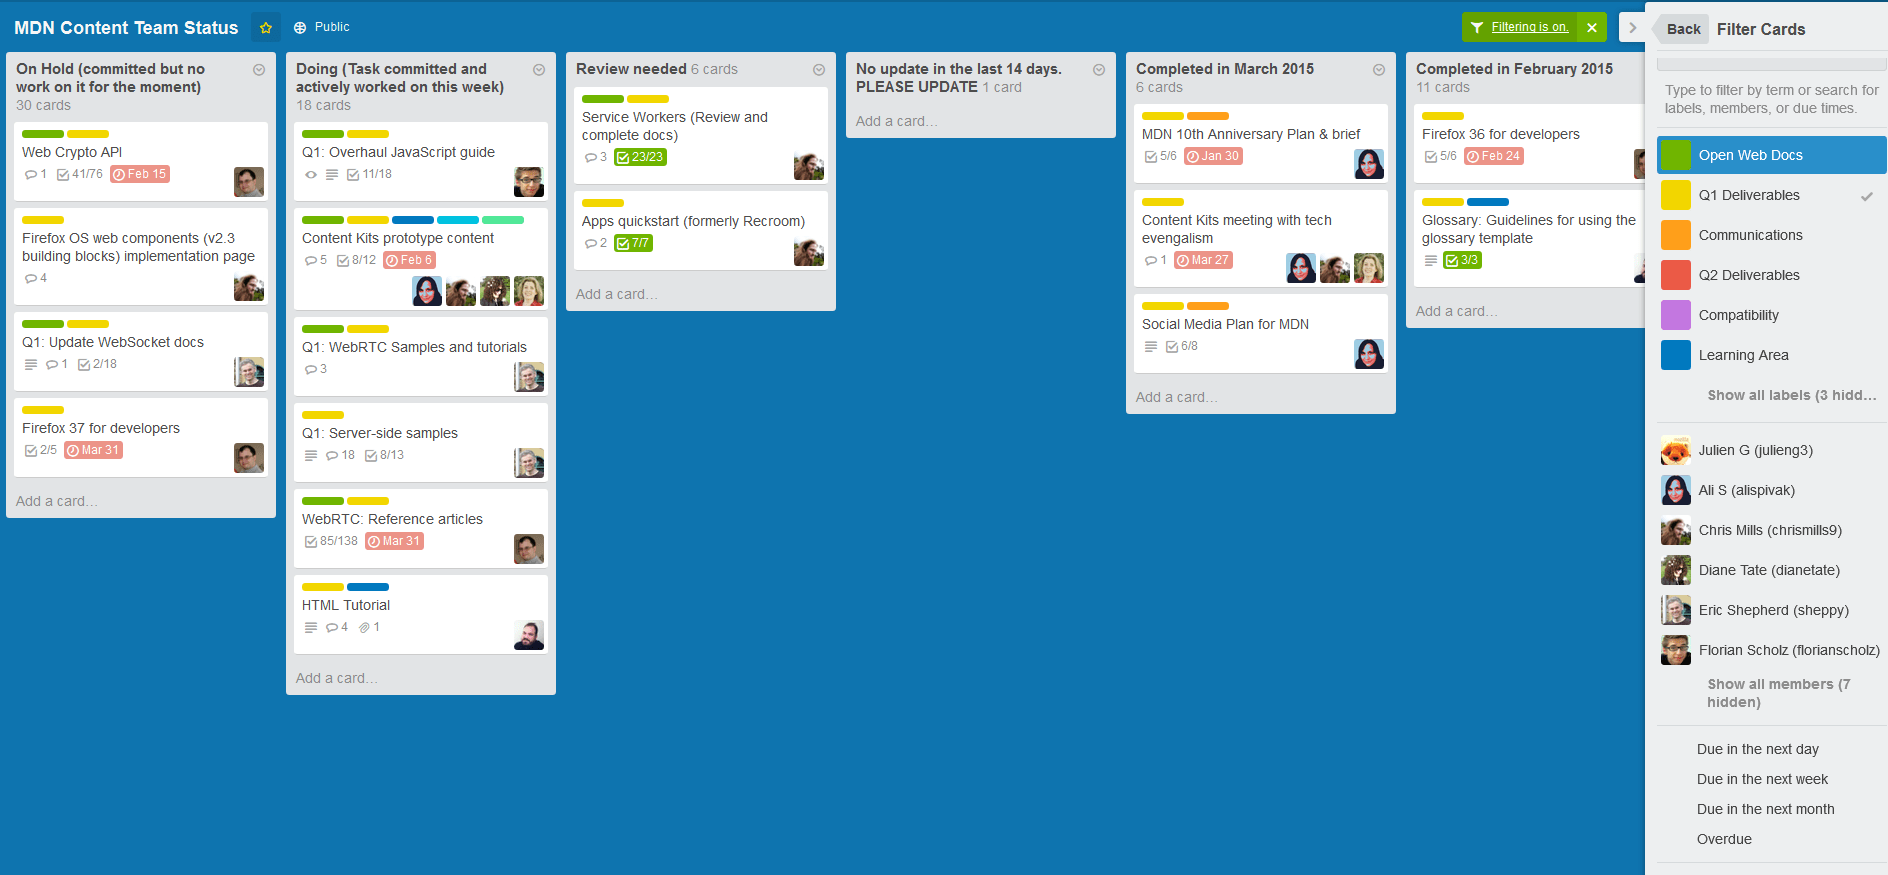 Breaking My Notebook Addiction - Using Trello to Get Organized.